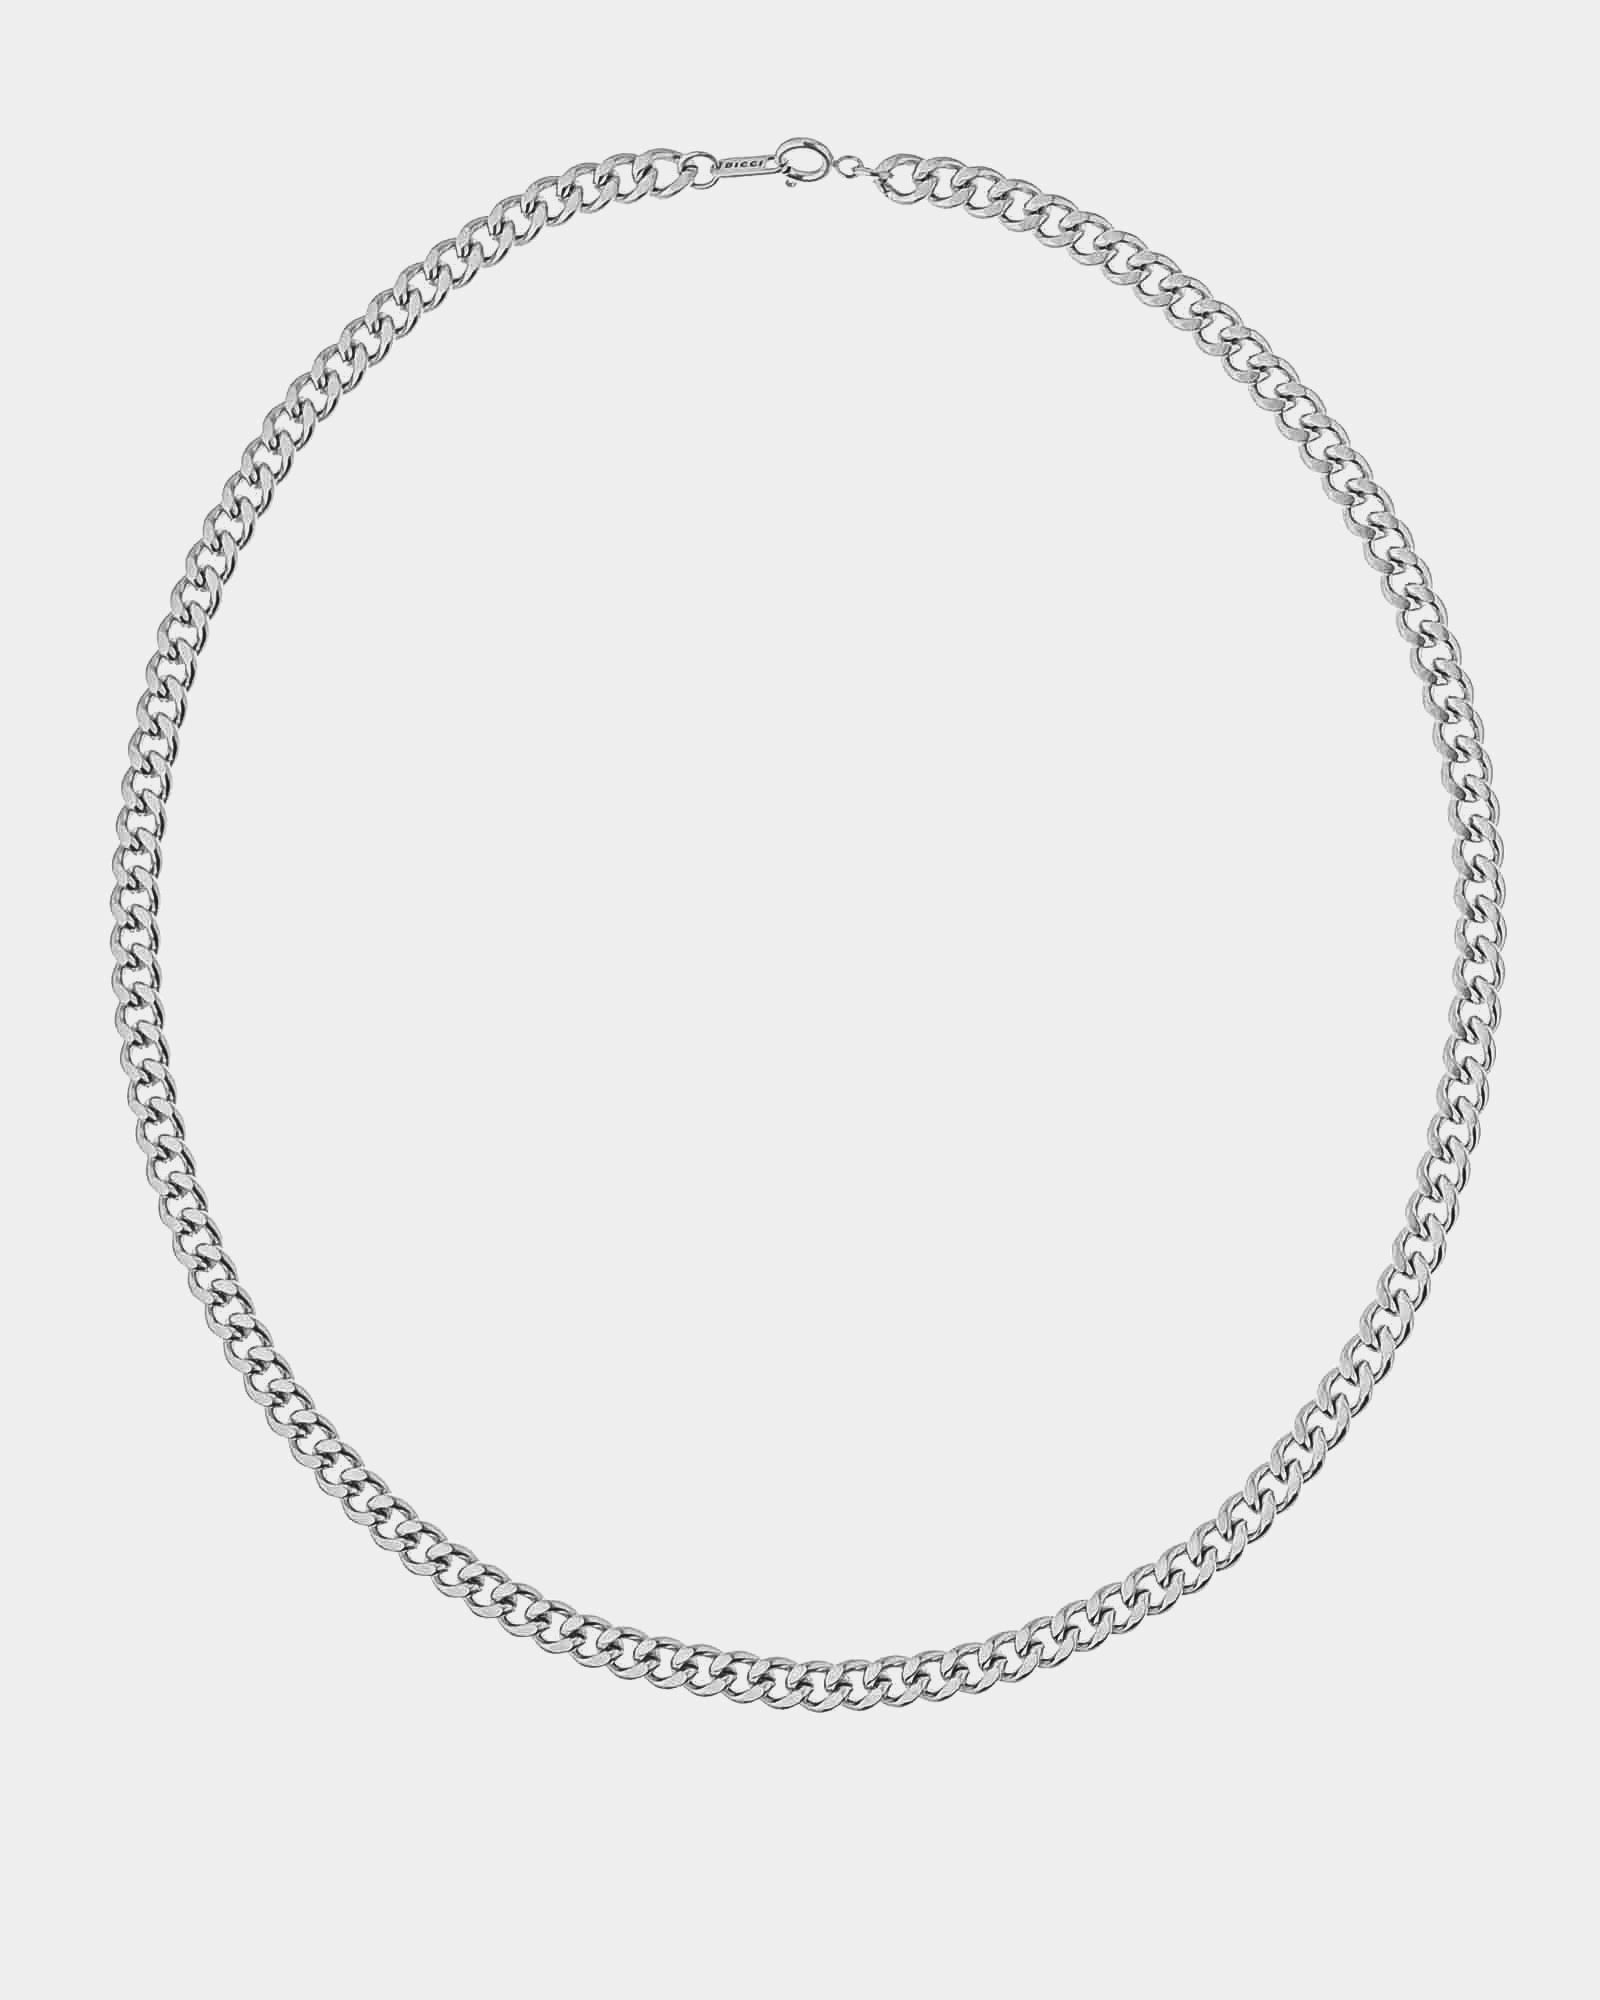 Monte Carlo - Stainless Steel Necklace 'Monte Carlo'- Steel Necklaces - Online Unissex Jewelry - Dicci